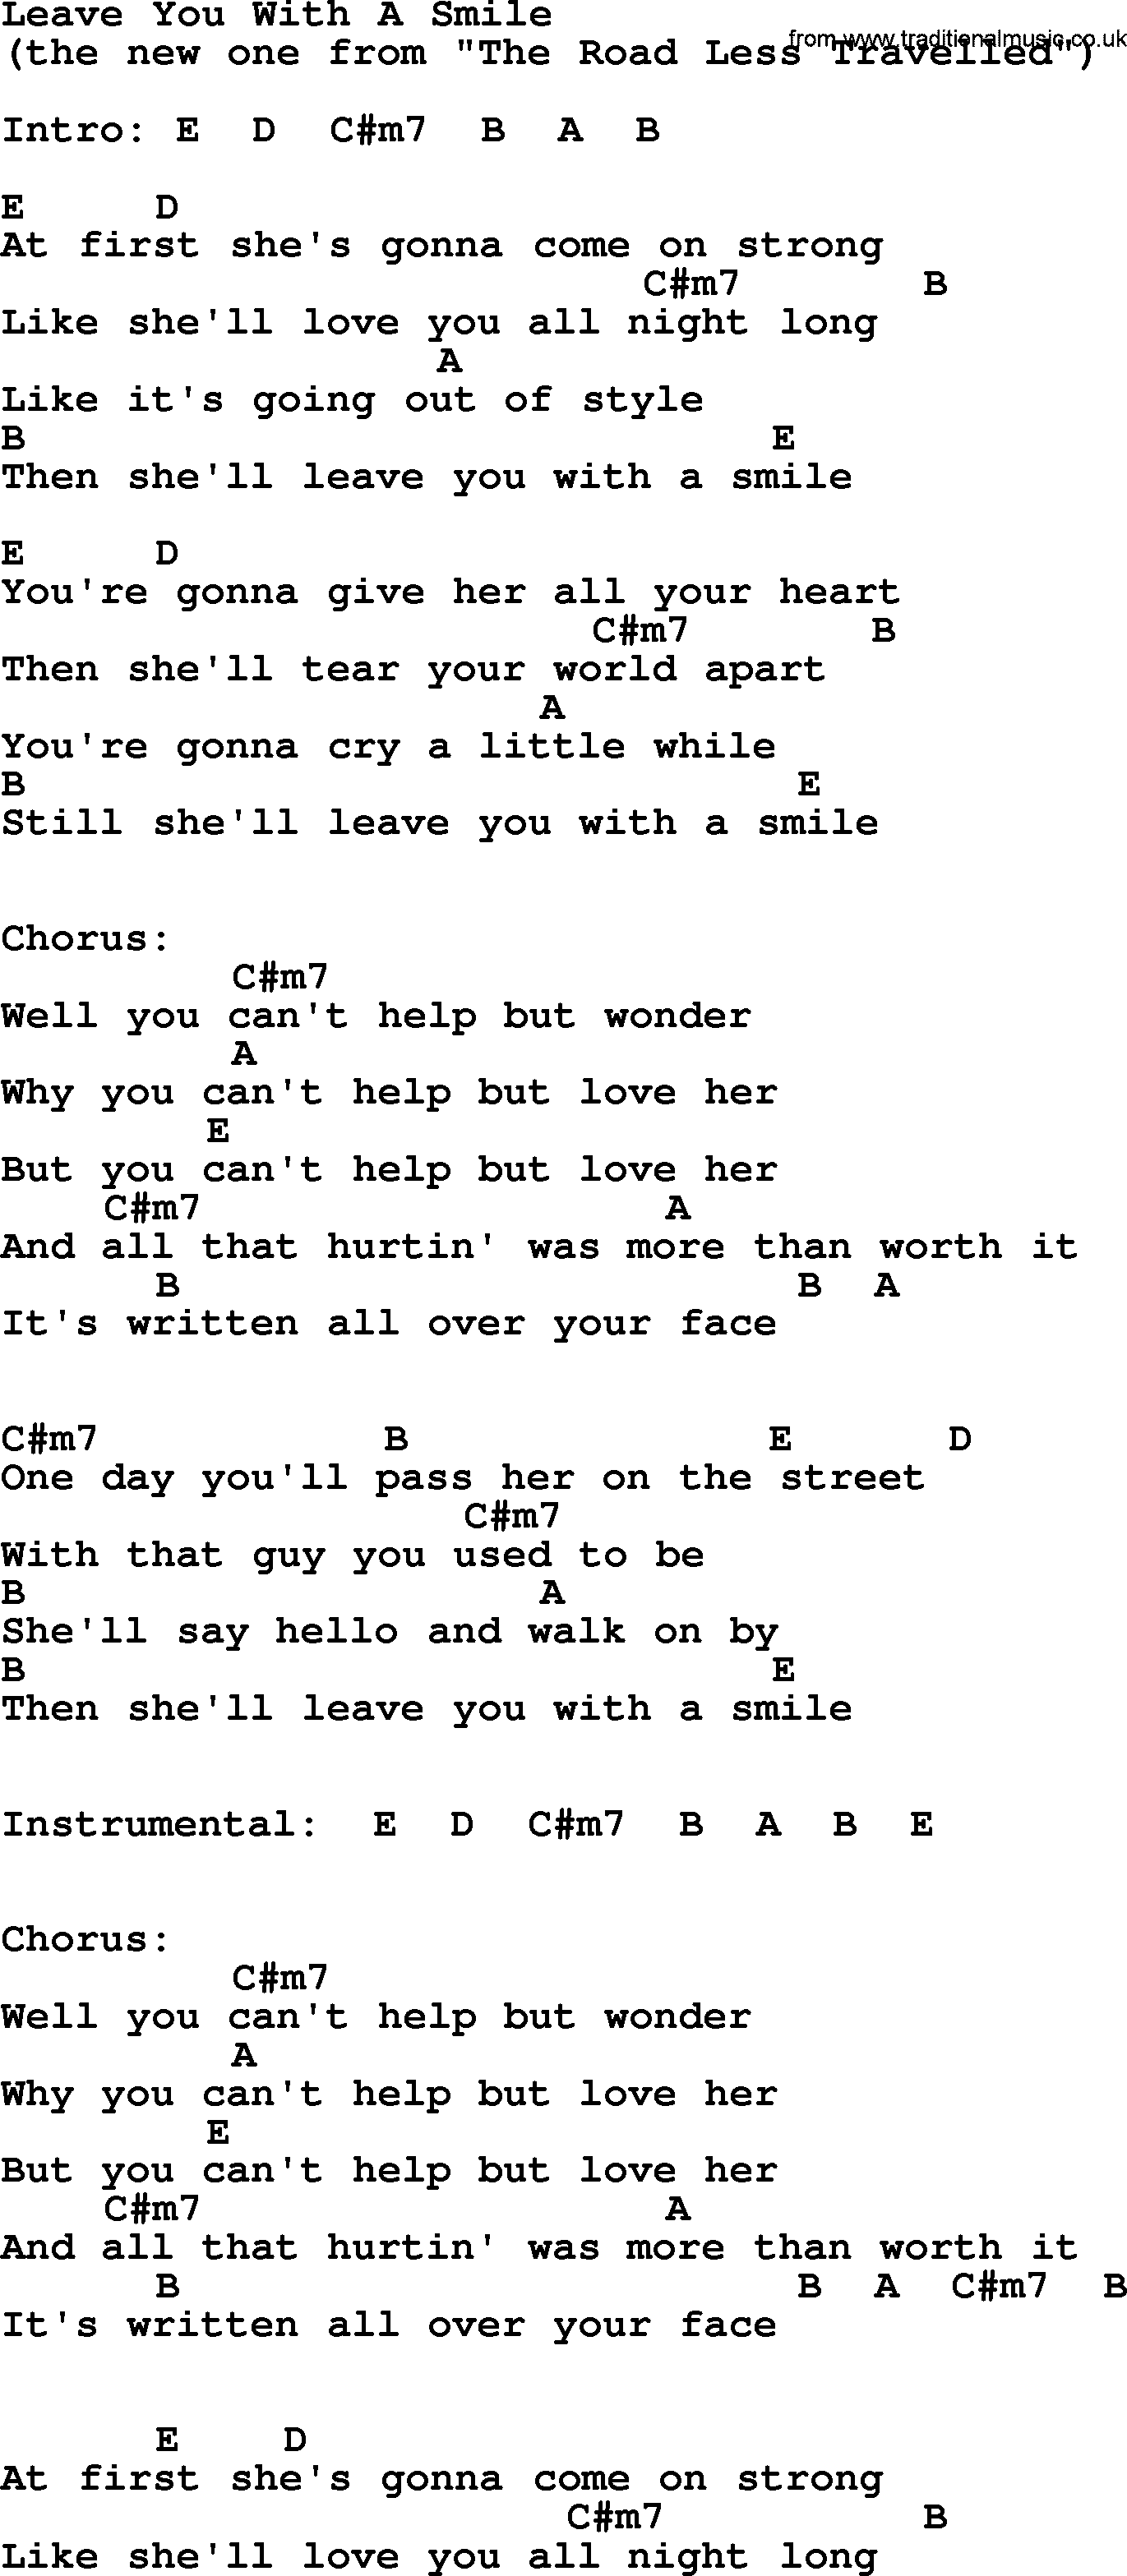 George Strait song: Leave You With A Smile, lyrics and chords